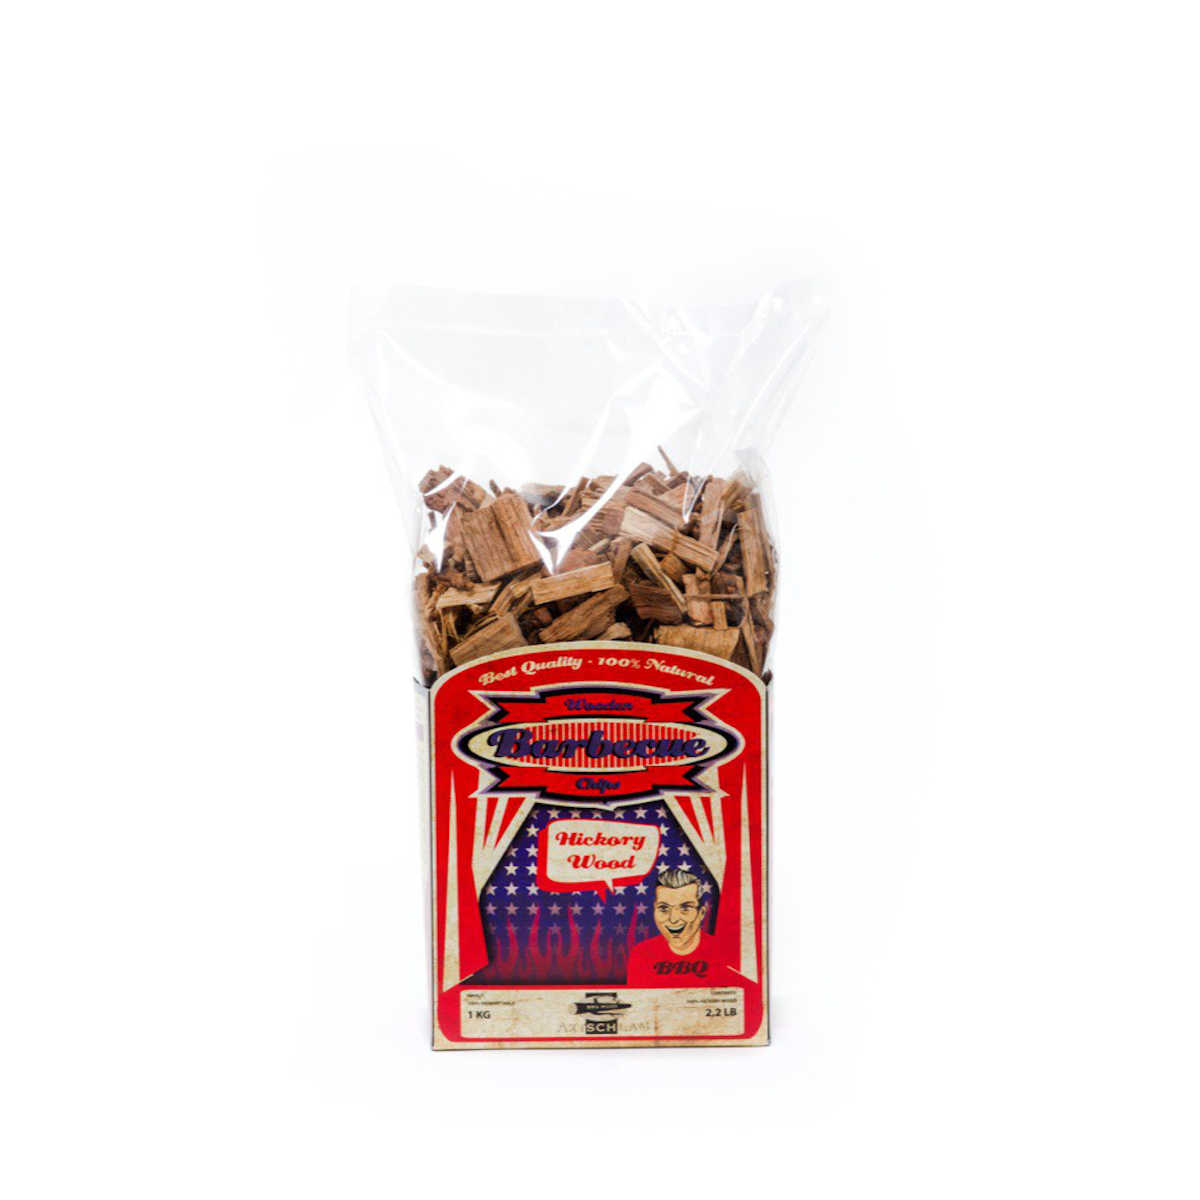 Axtschlag Wood Smoking Chips Hickory, 1 kg